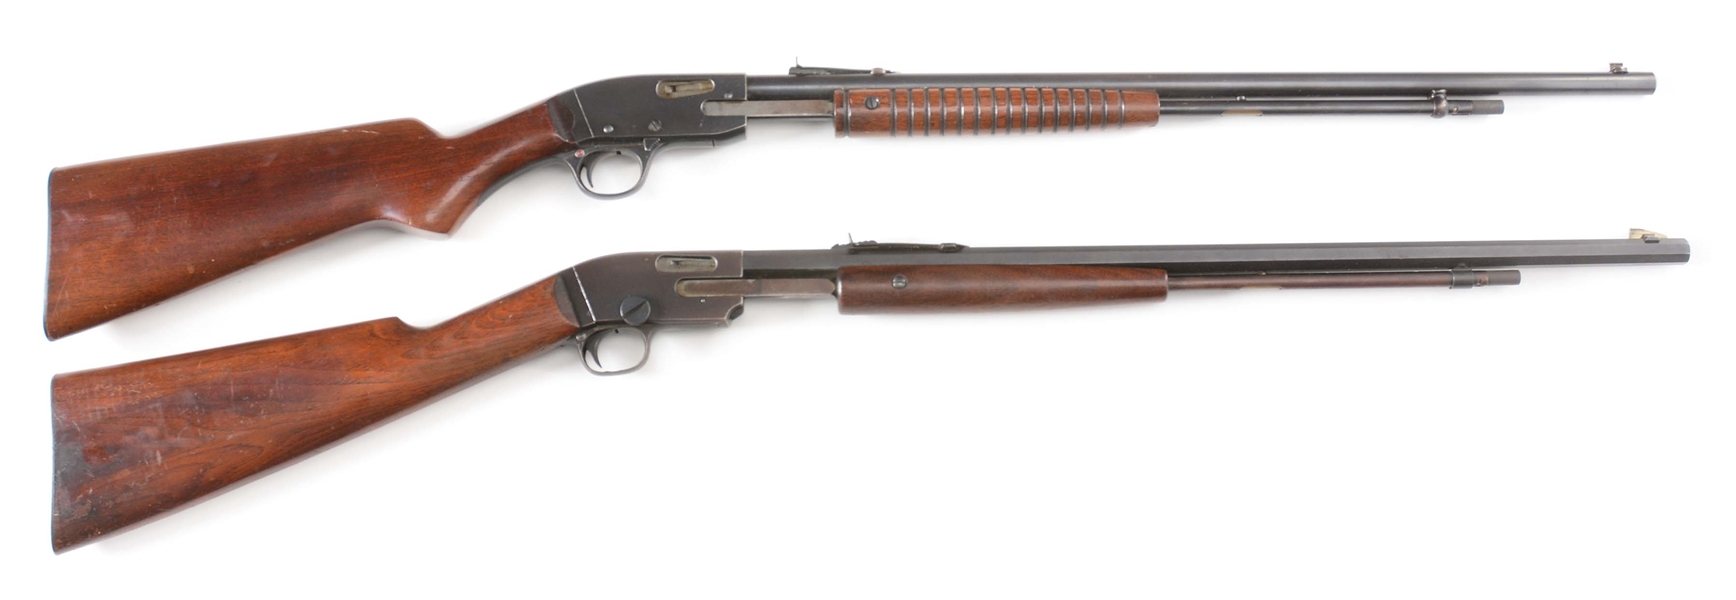 (C) LOT OF TWO: TWO TRYON KEYSTONE SLIDE ACTION RIFLES.